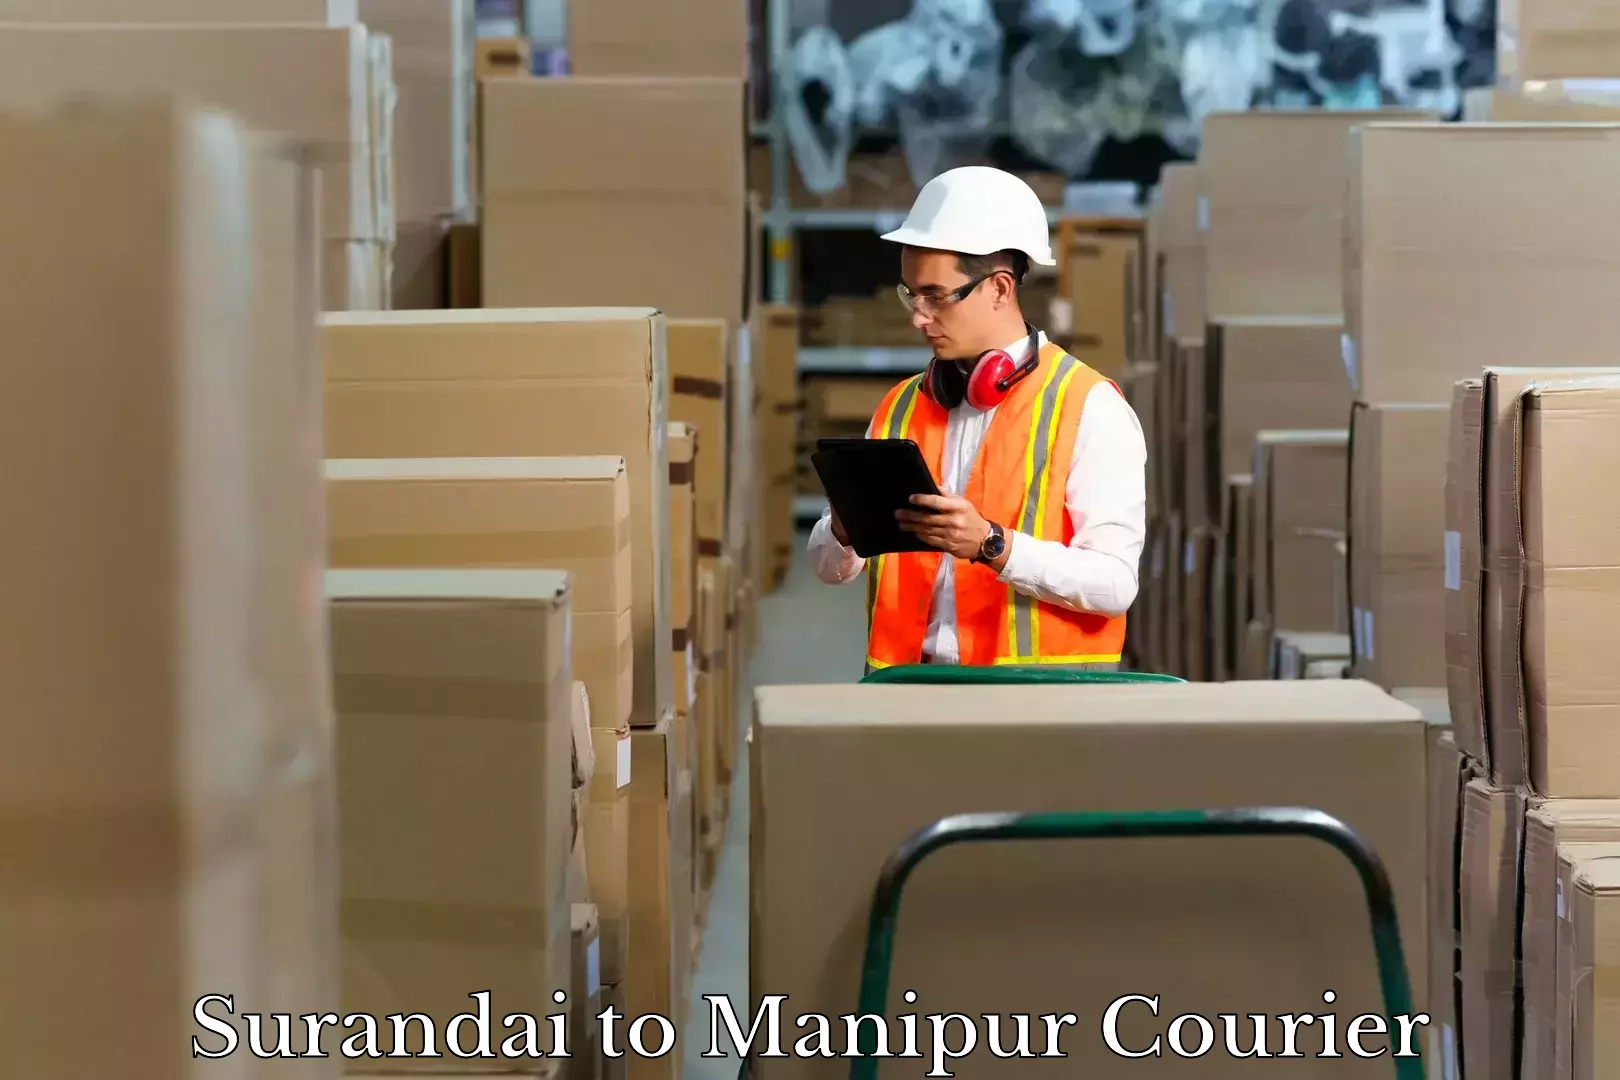 Luggage shipment specialists Surandai to Manipur